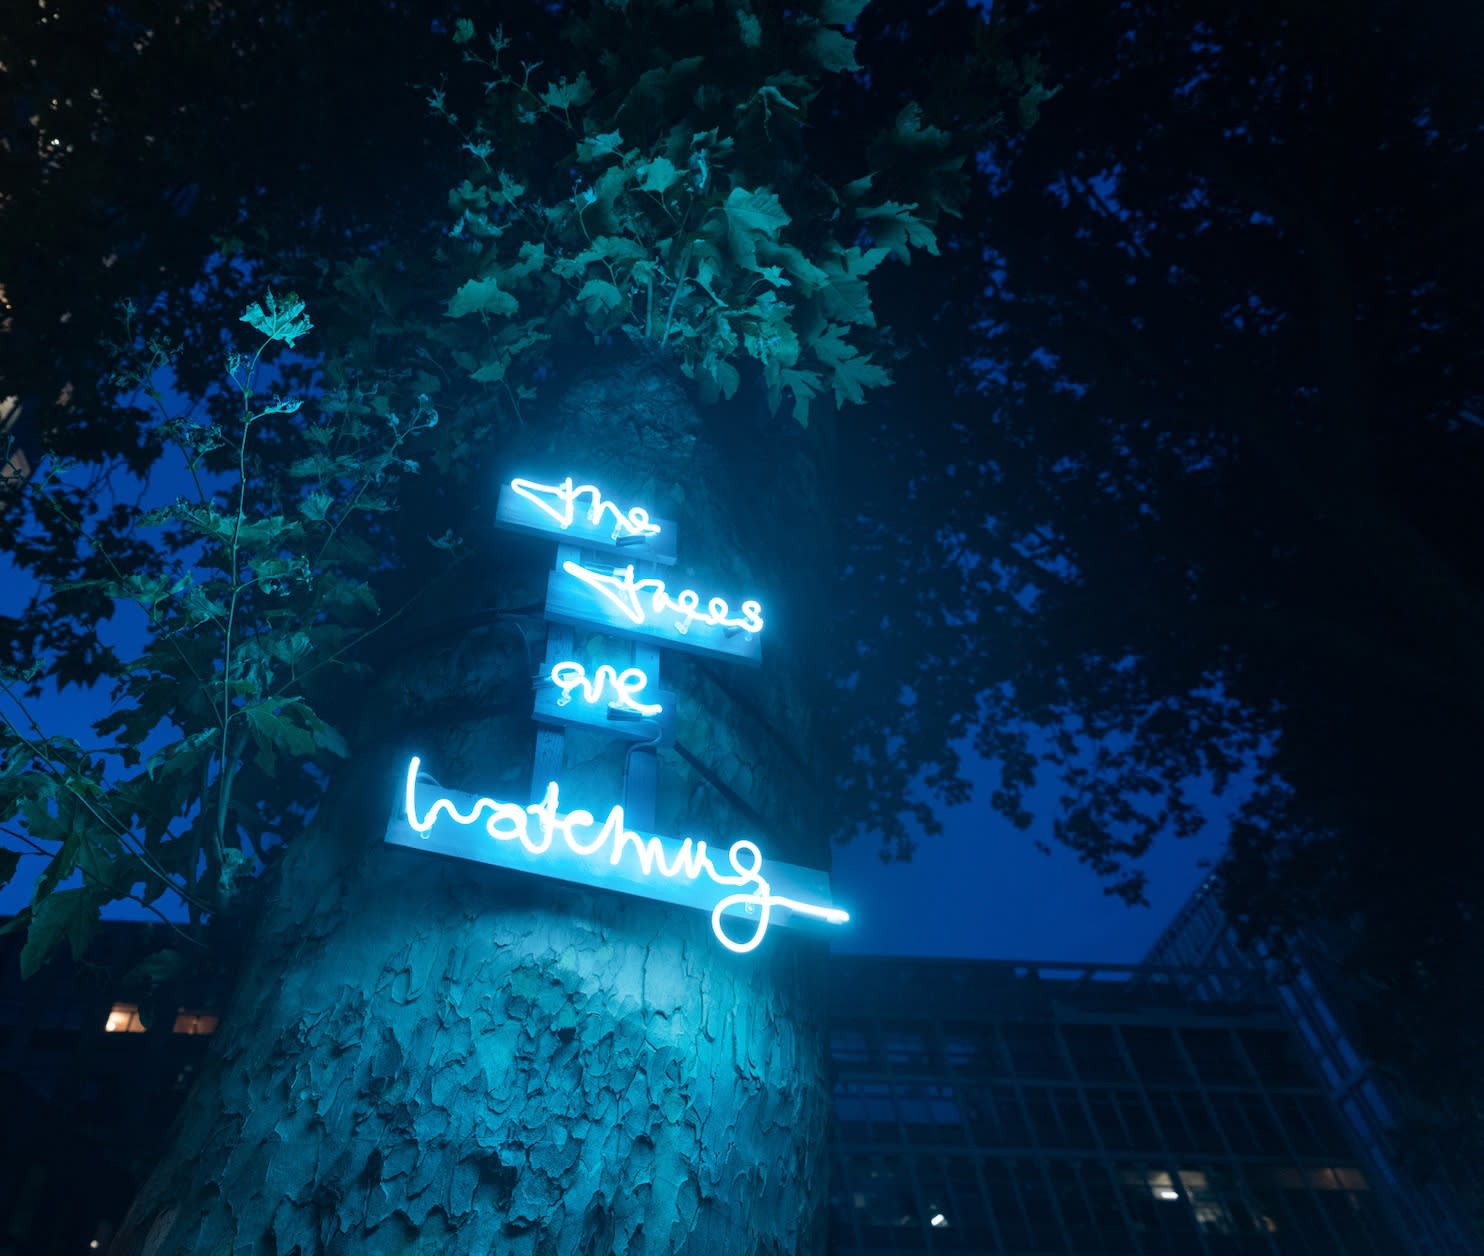 The trees are watching - Public Light Art commissioned by Westminster Council via MT Art